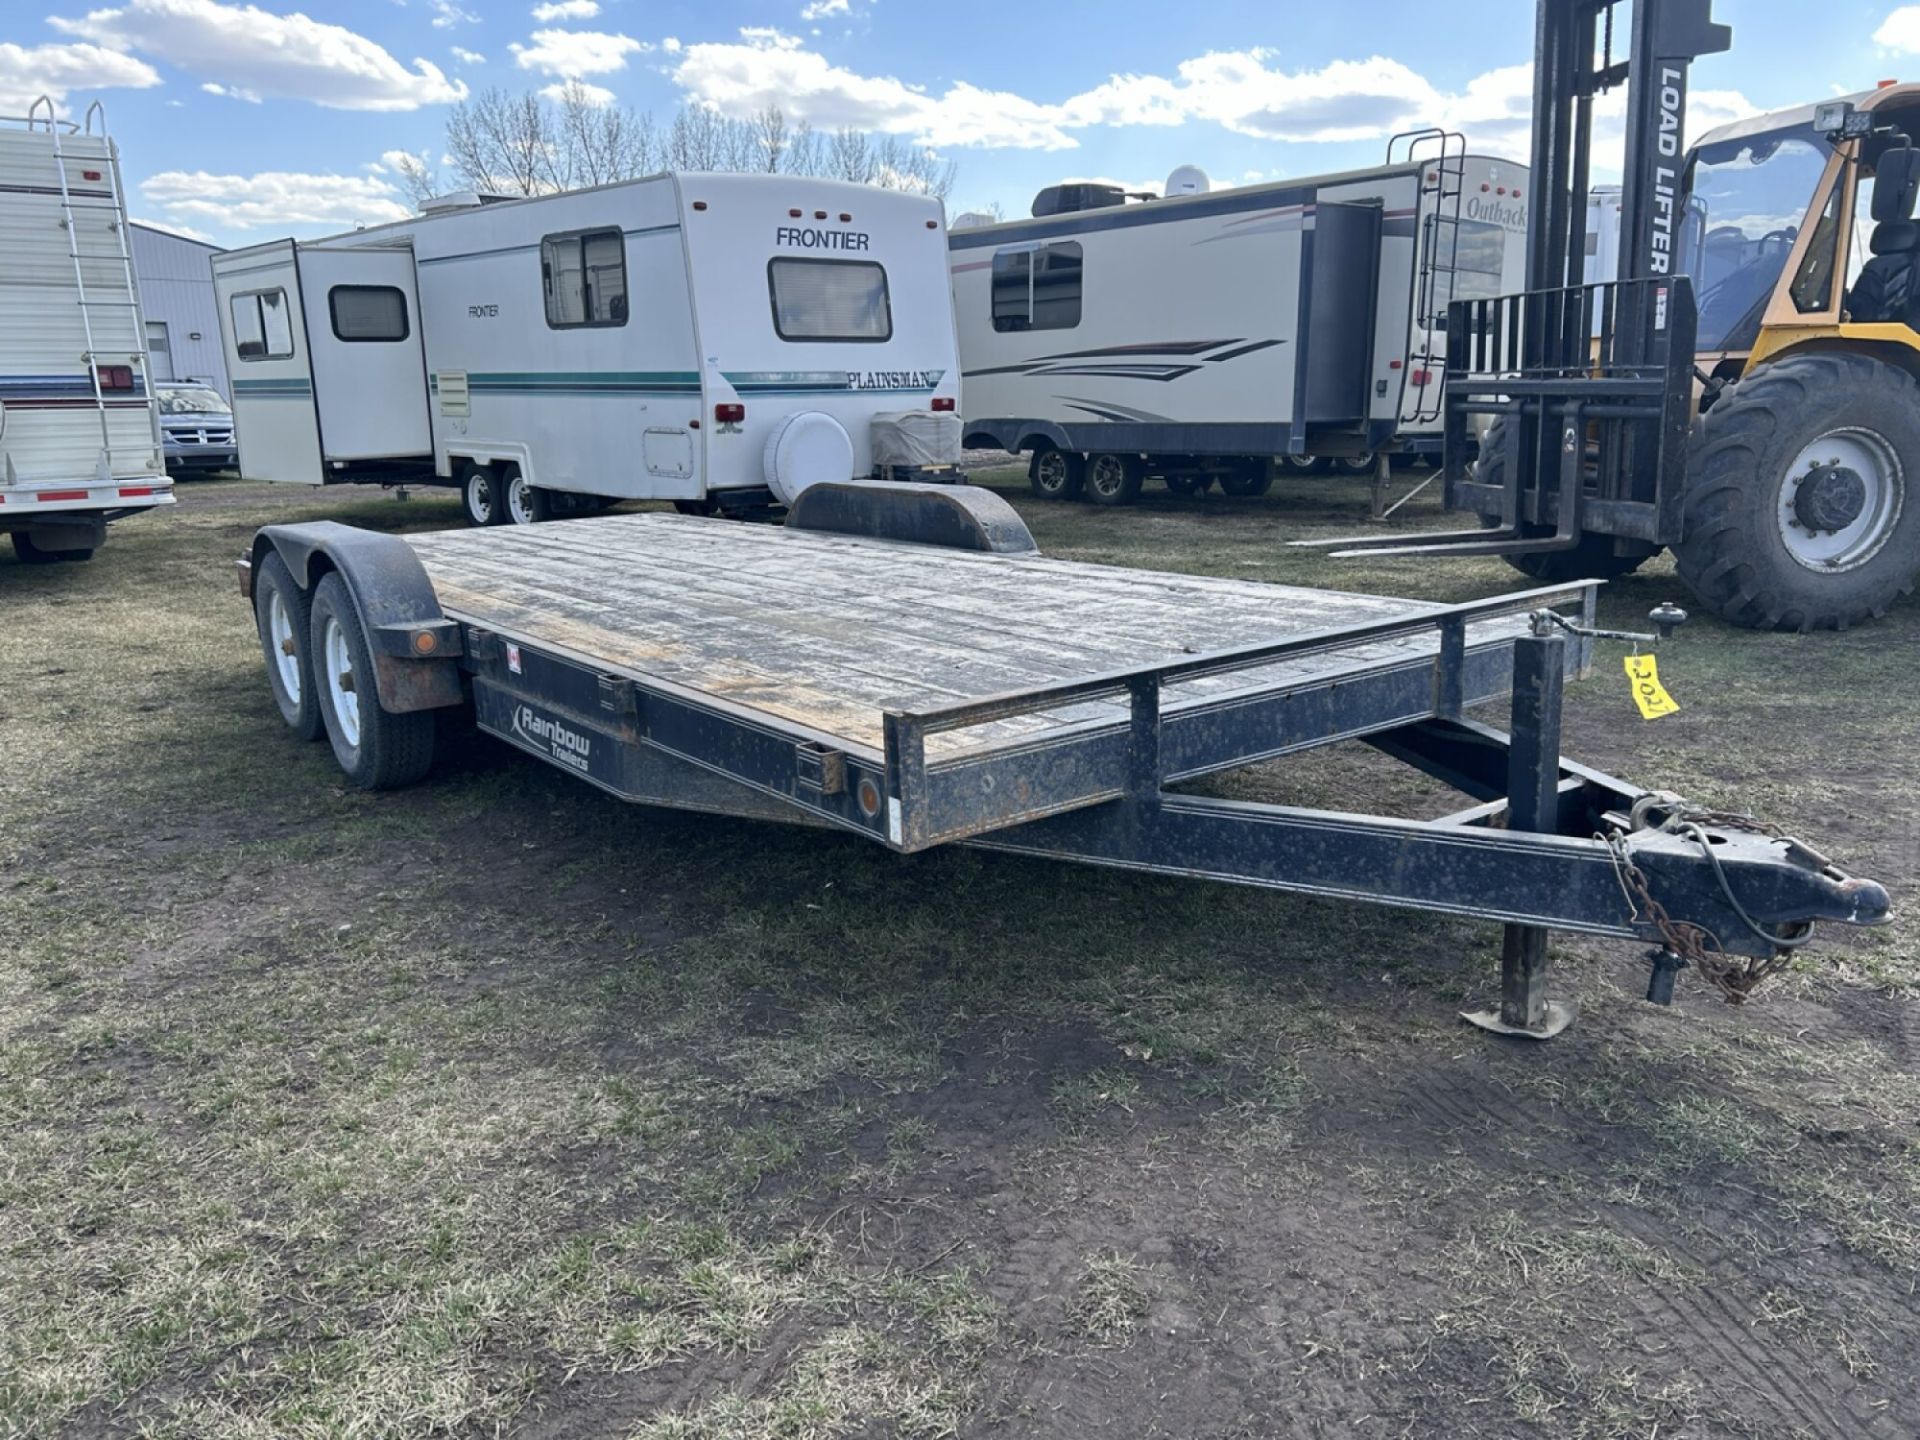 2017 18' CAR HAULER - LIGHTS, BRAKES WORK, NEW TIRES FROM OK TIRE S/N: 2RGBE1824H1000481 - Image 2 of 6